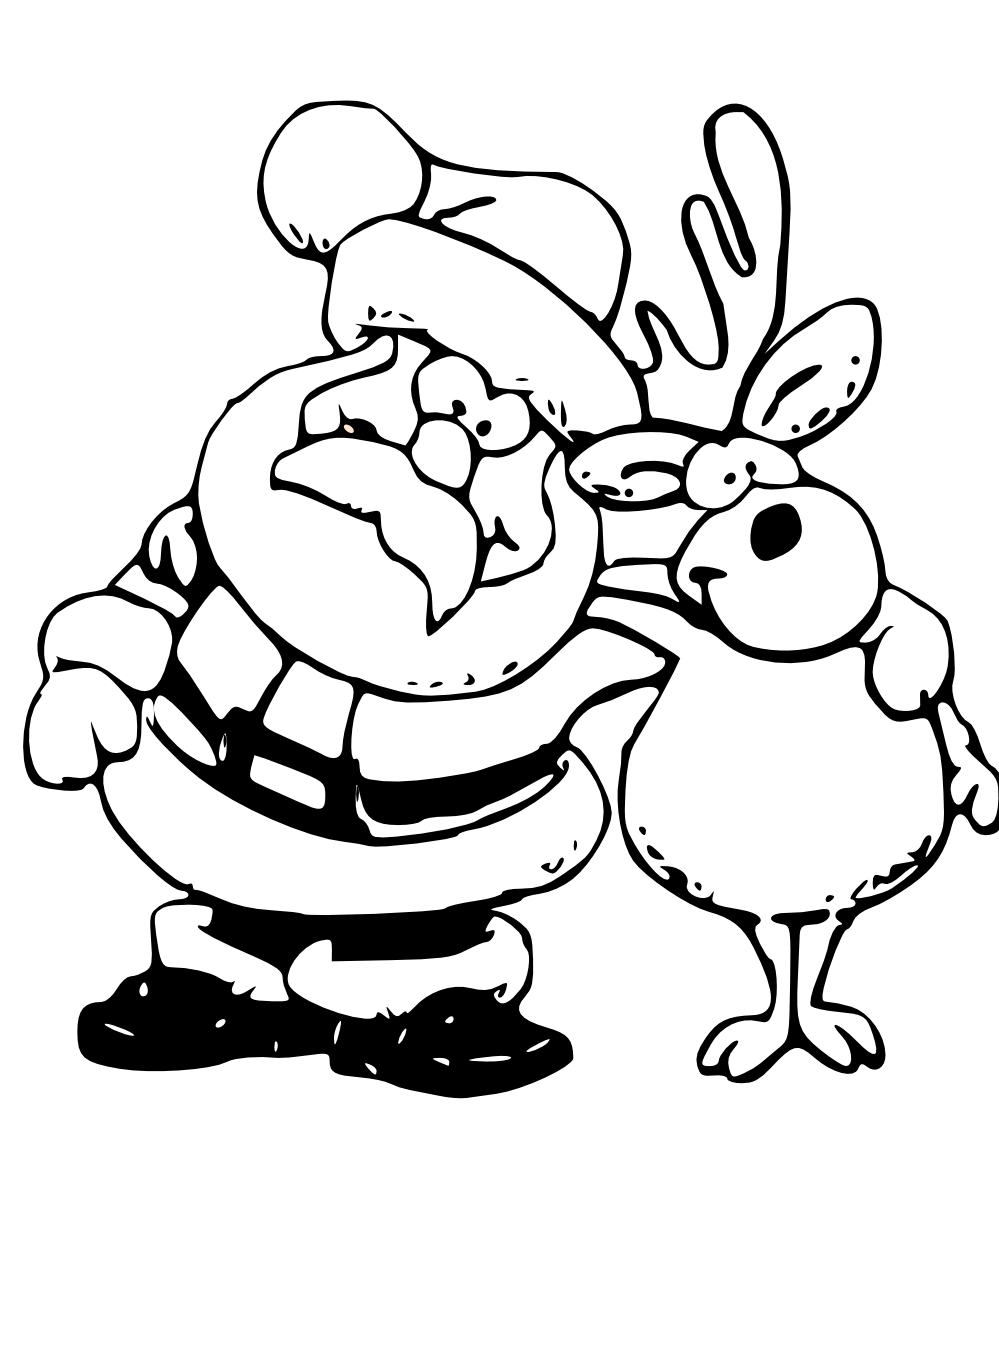 Santa and reindeer clipart black and white